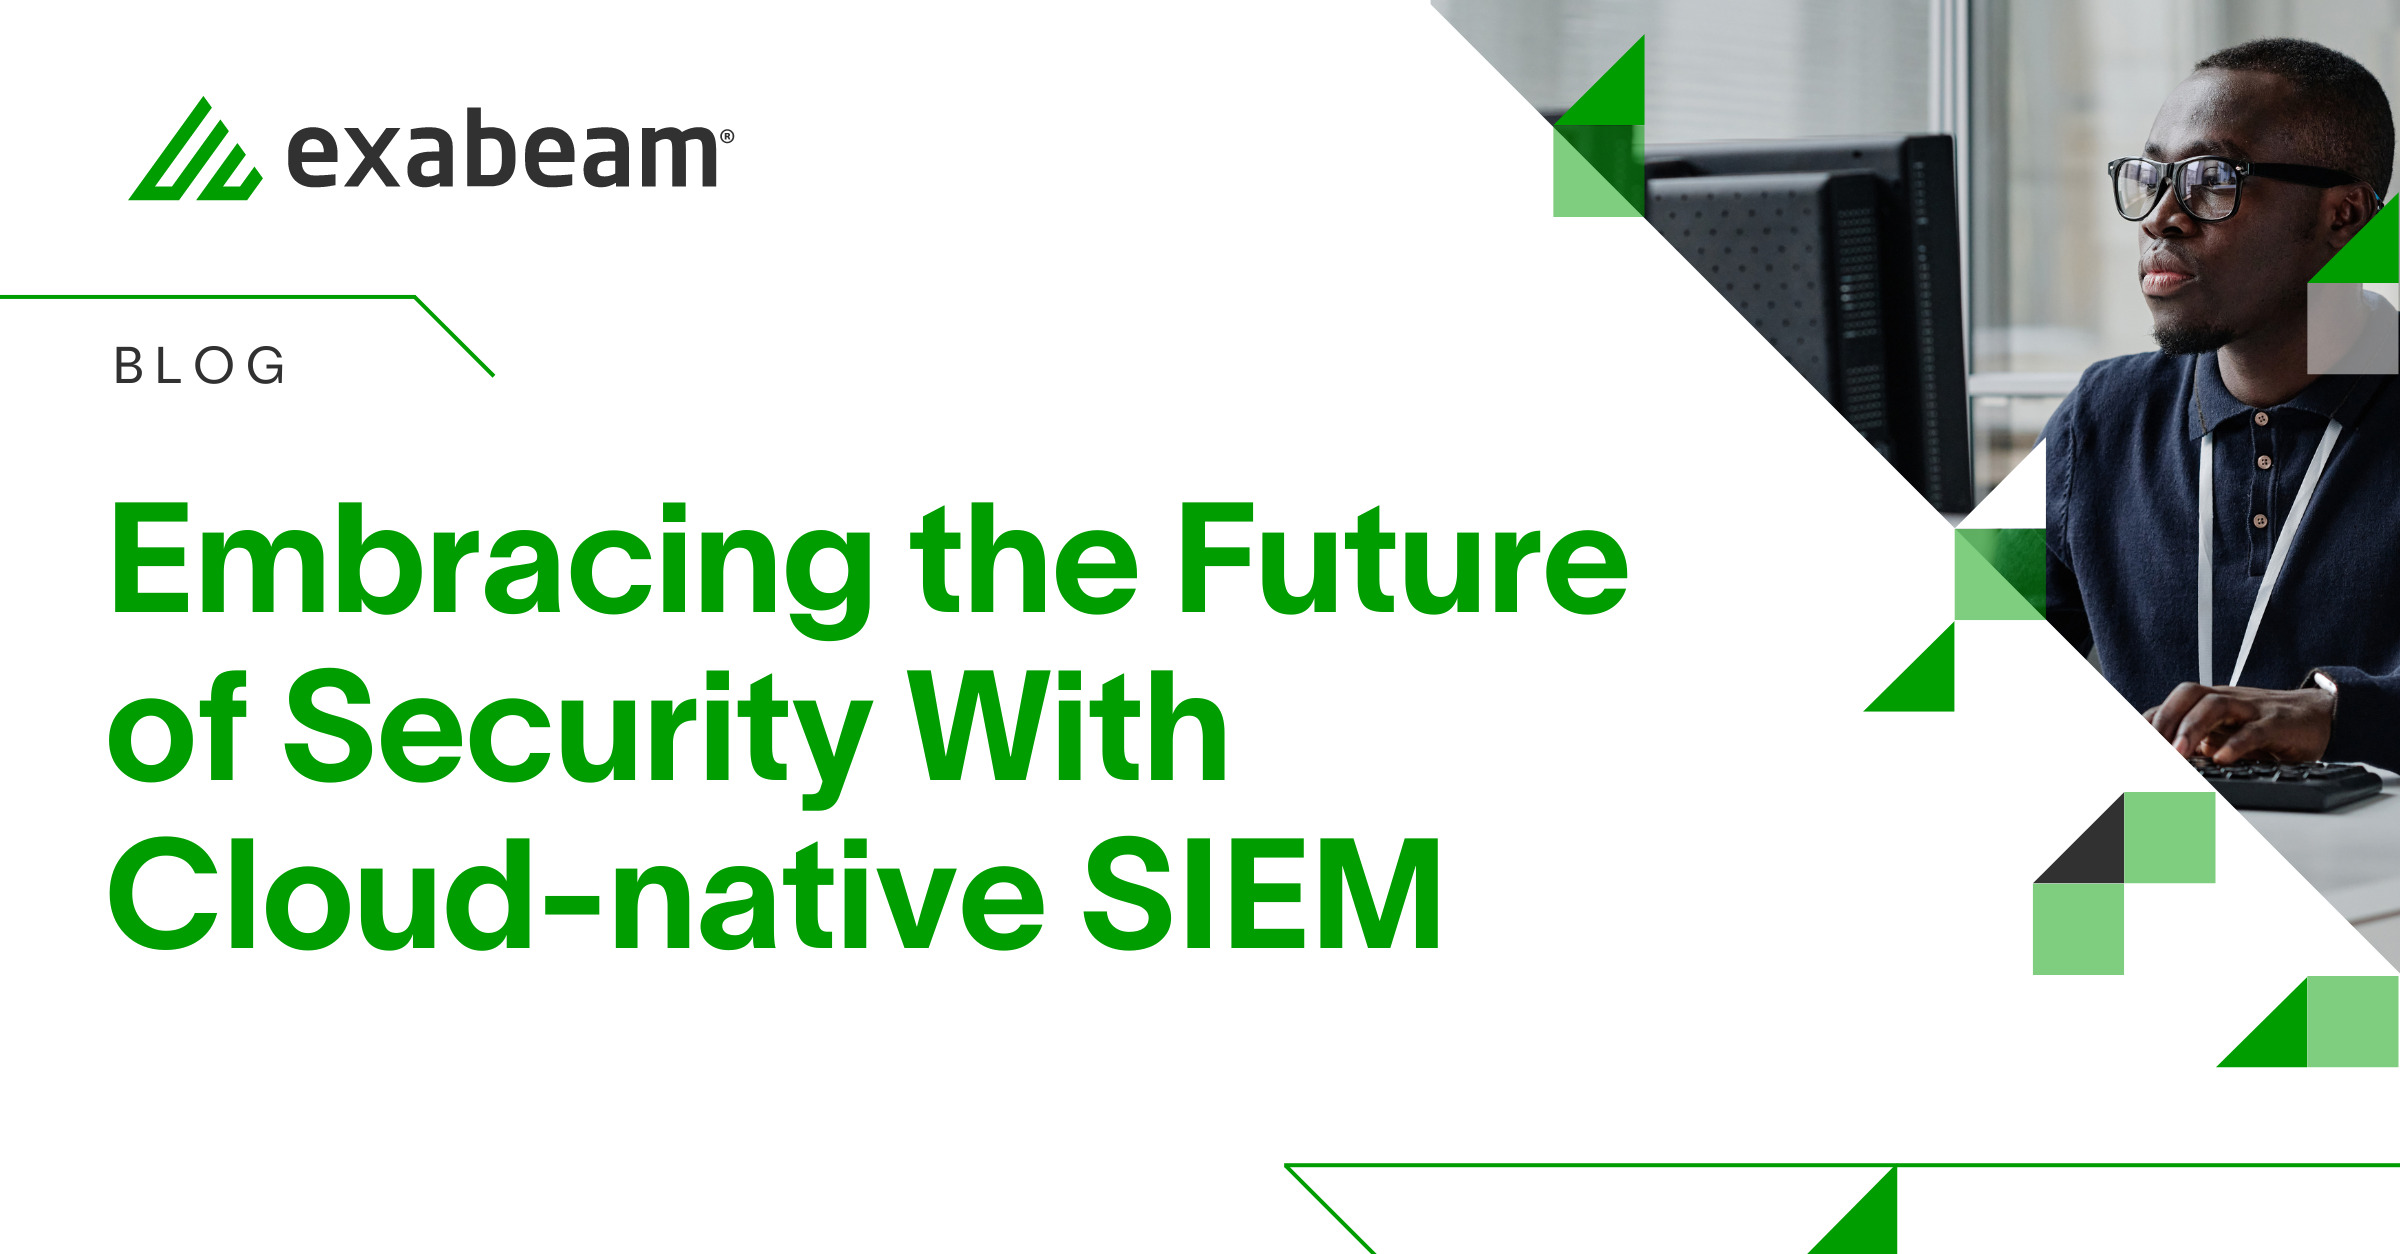 Embracing the Future of Security With Cloud-native SIEM